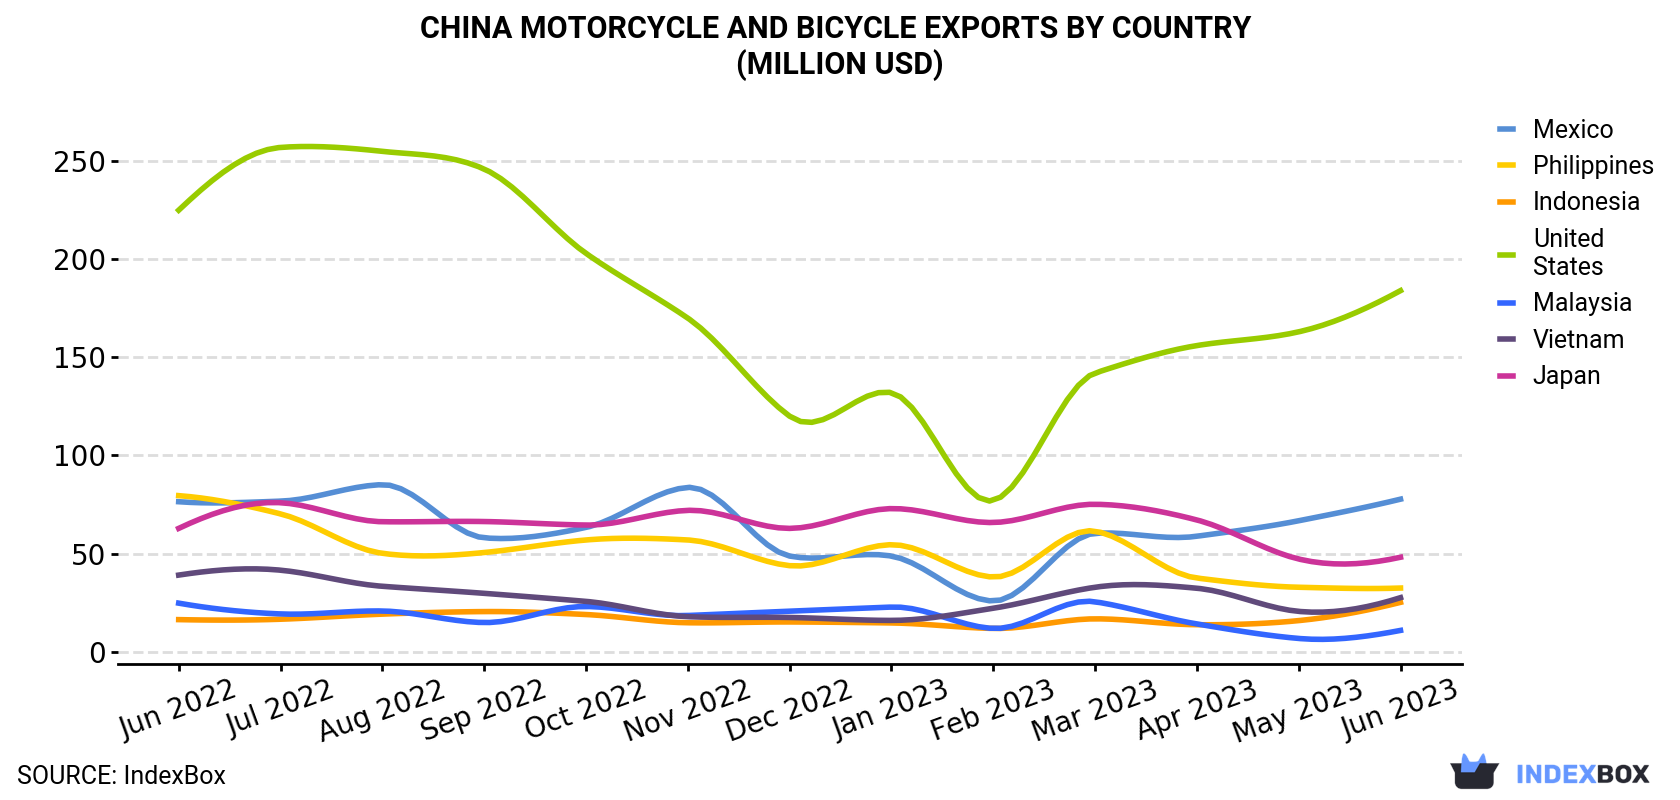 Export of Motorcycles And Bicycles From China Surges By 3% in June 2023 ...